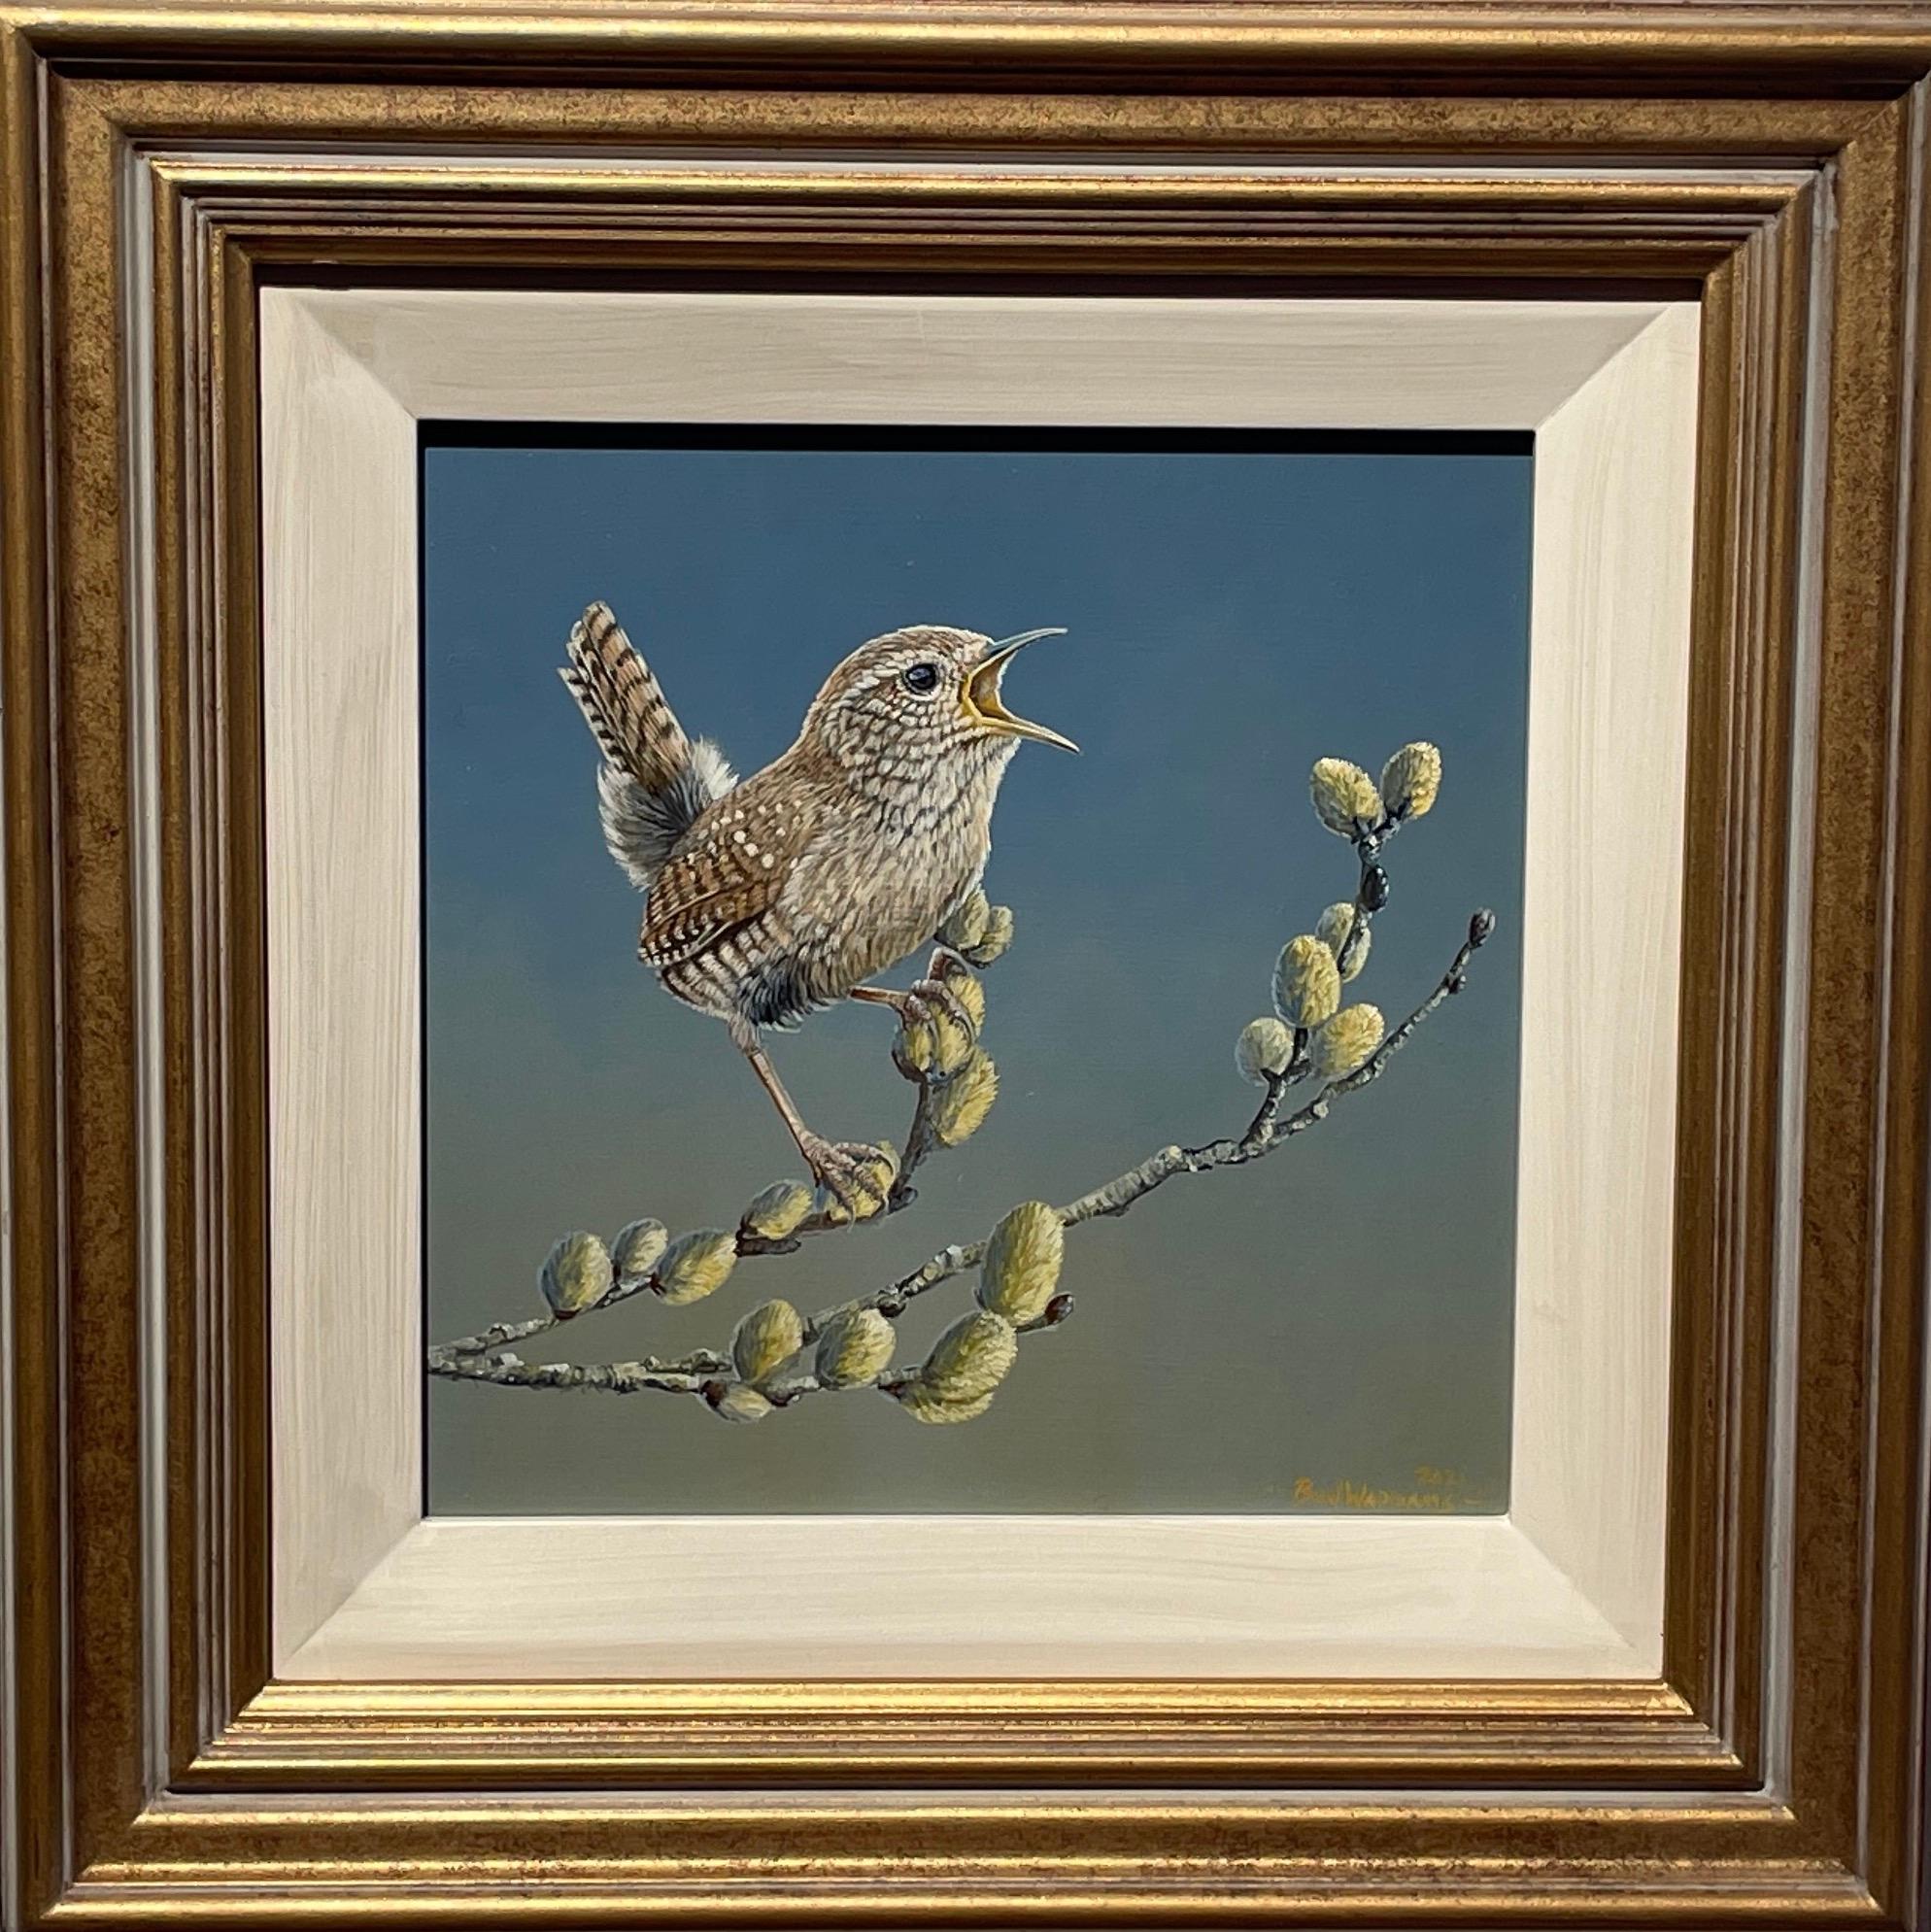 'Ever the Optimist' Contemporary photorealist painting of a Wren small bird wild - Painting by Ben Waddams